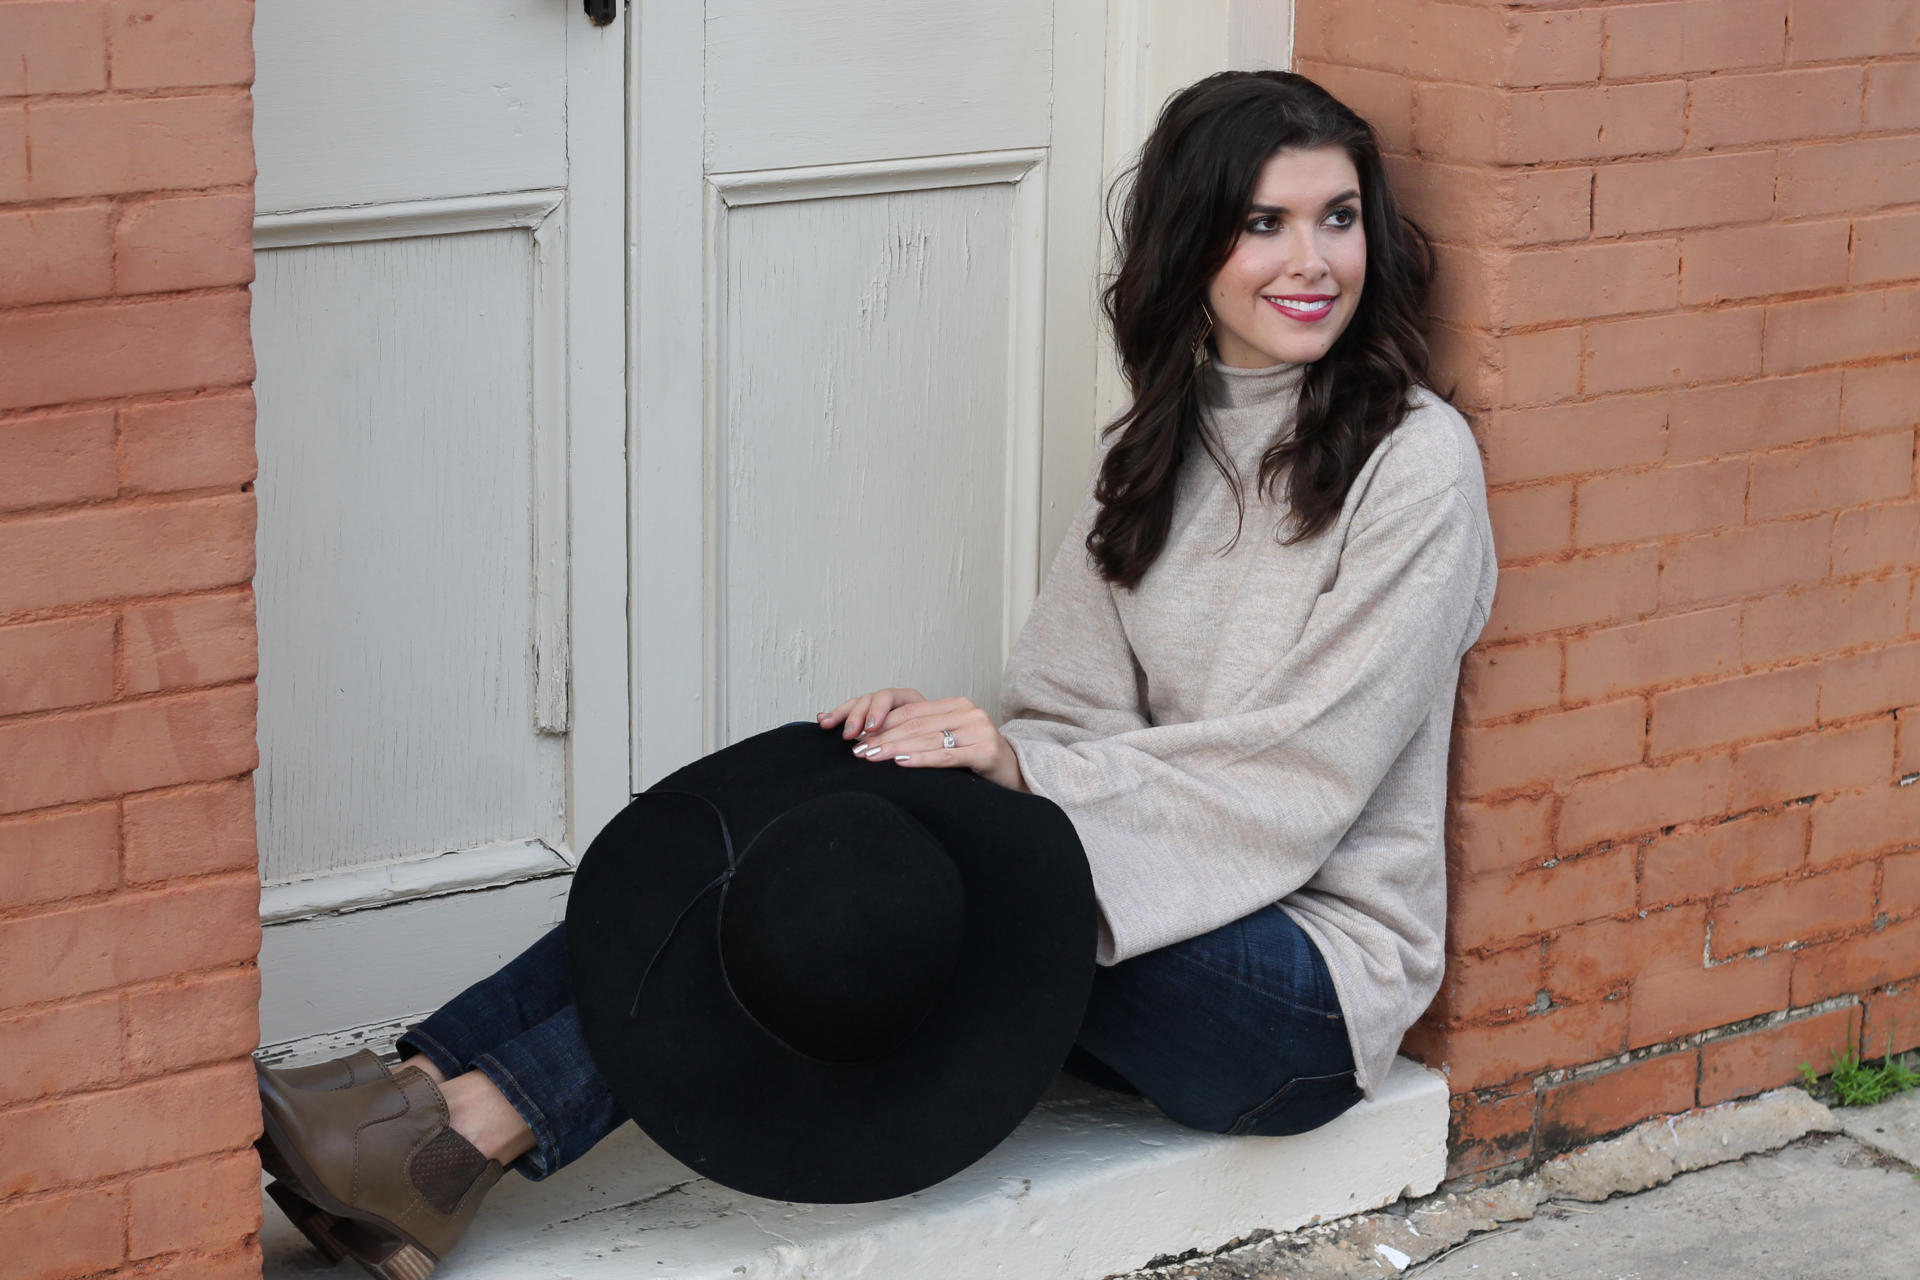 Bell Sleeve Sweater by New Orleans fashion blogger Style Waltz